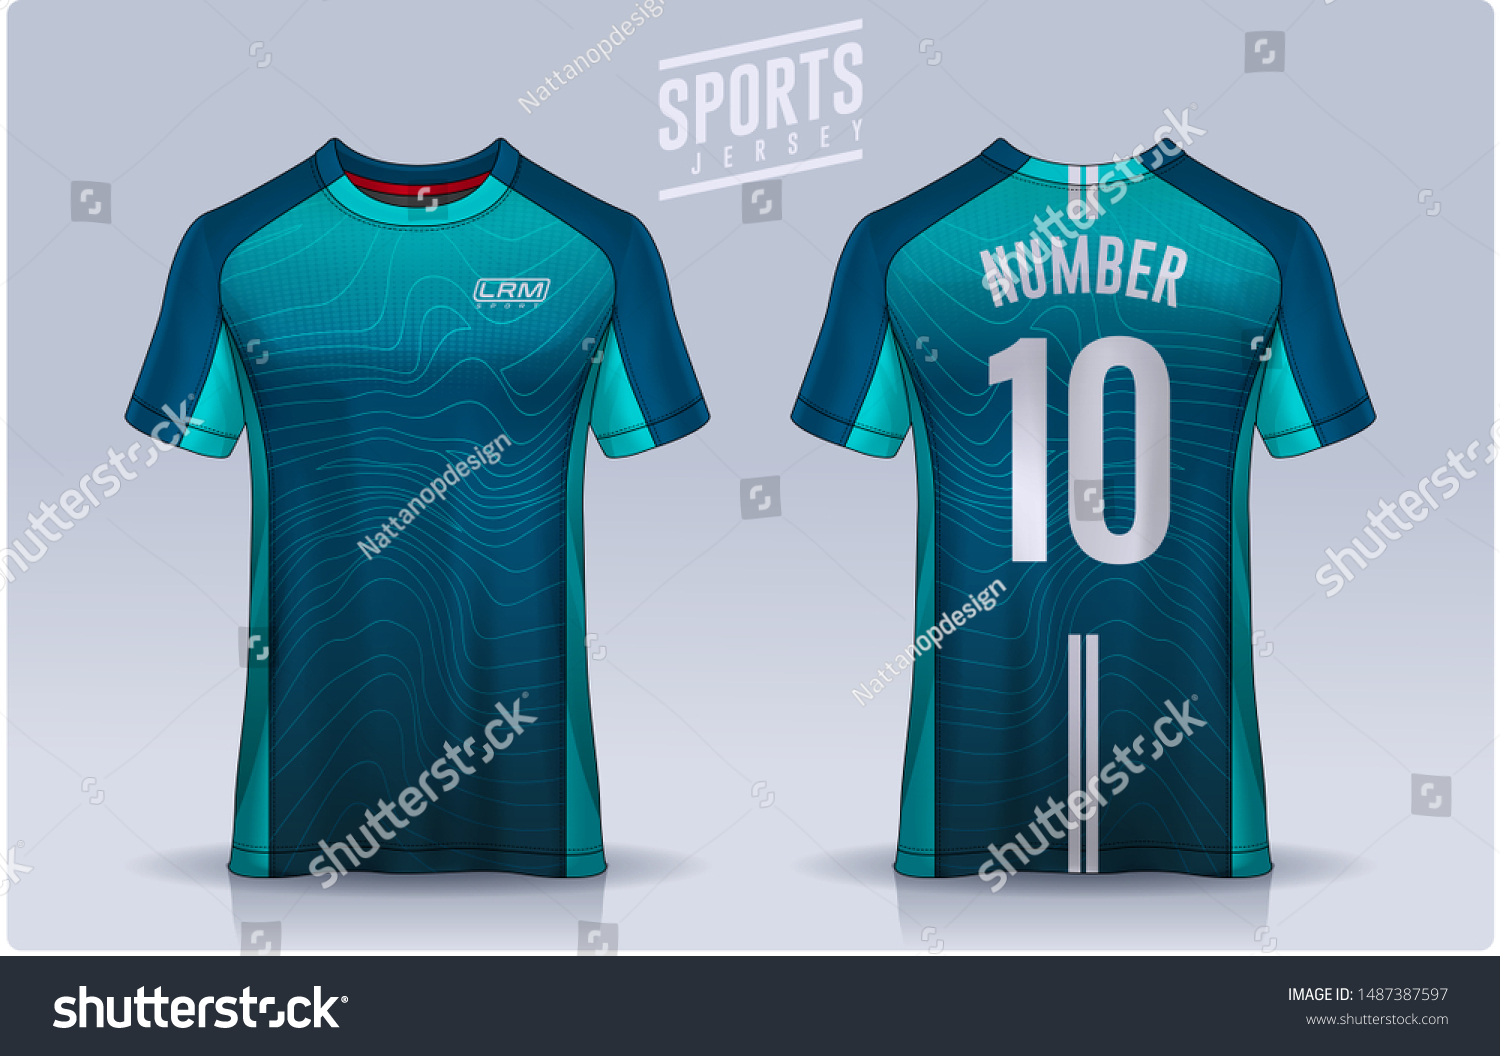 Download Tshirt Sport Design Template Soccer Jersey Stock Vector Royalty Free 1487387597